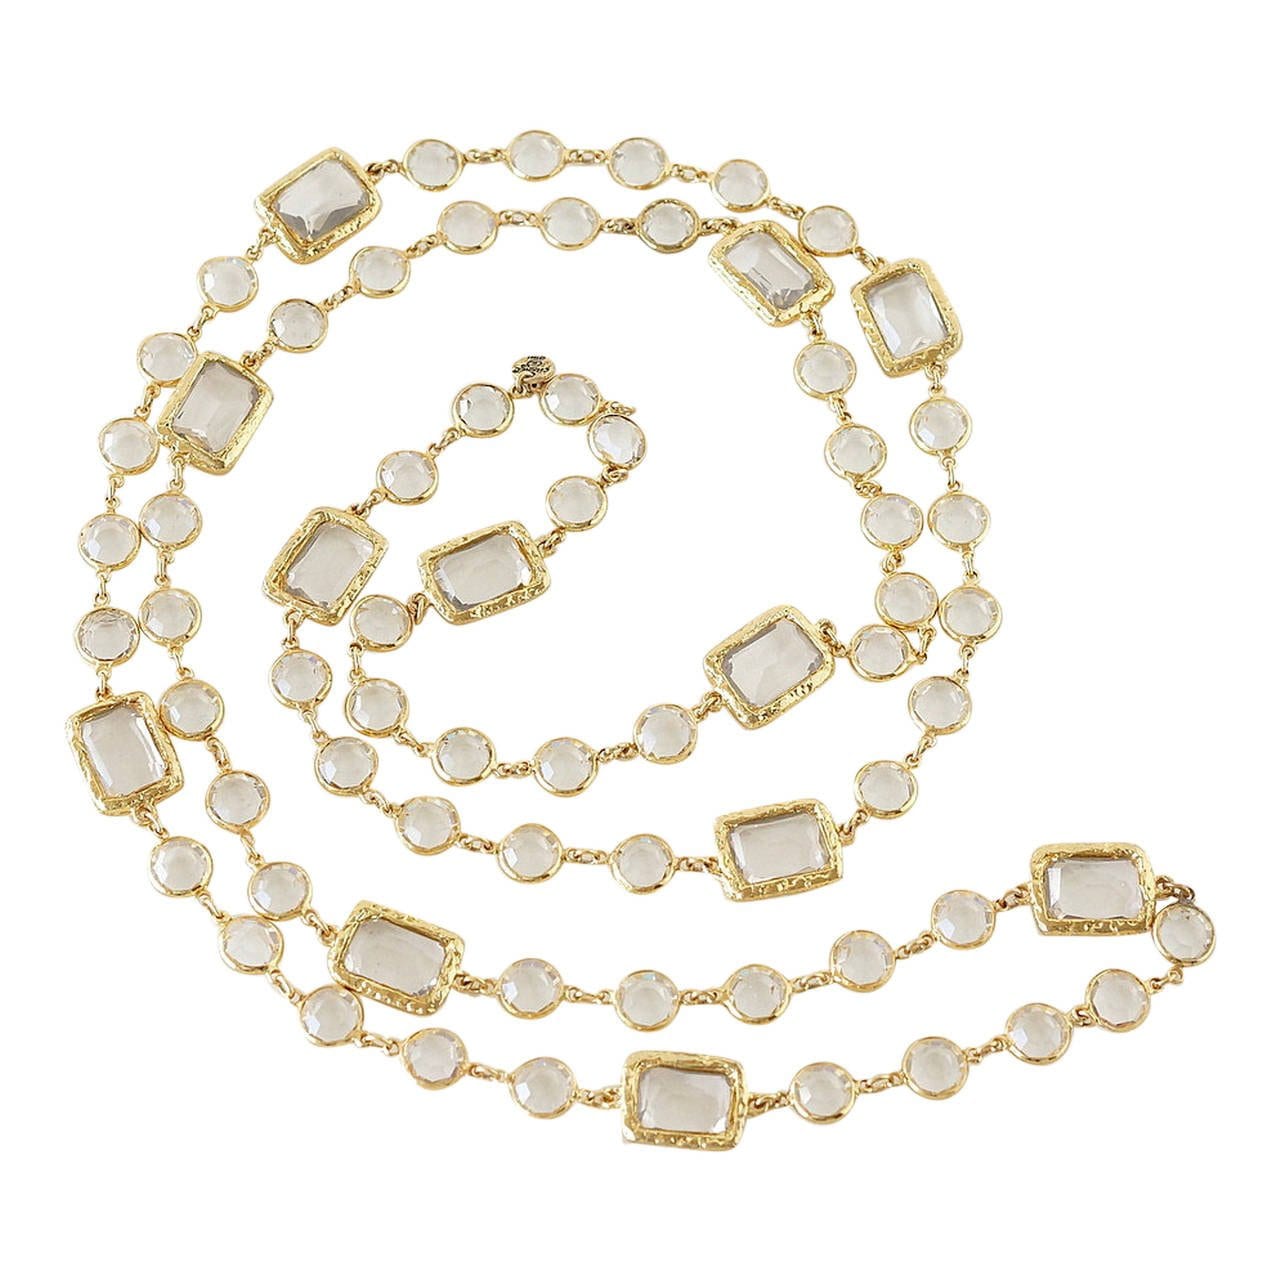 Chanel Paris 1981 Gold Plated Faux Pearl Crystal Chain Sautoir Necklace